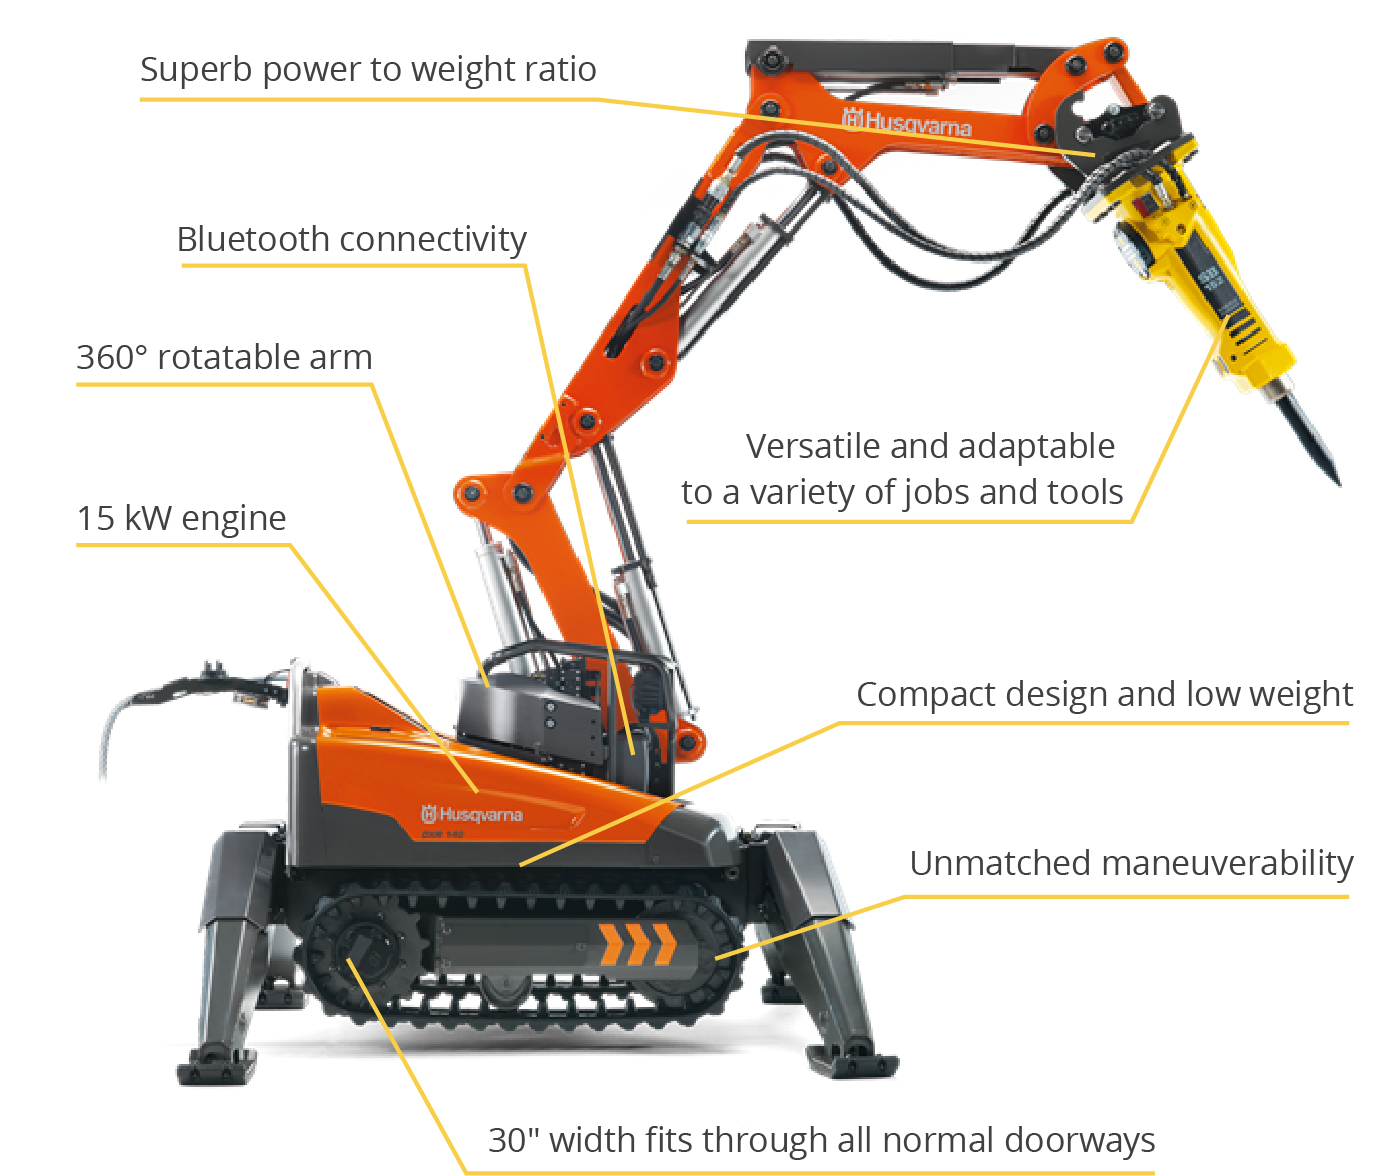 Diagram with call out features of the Husqvarna demolition robot